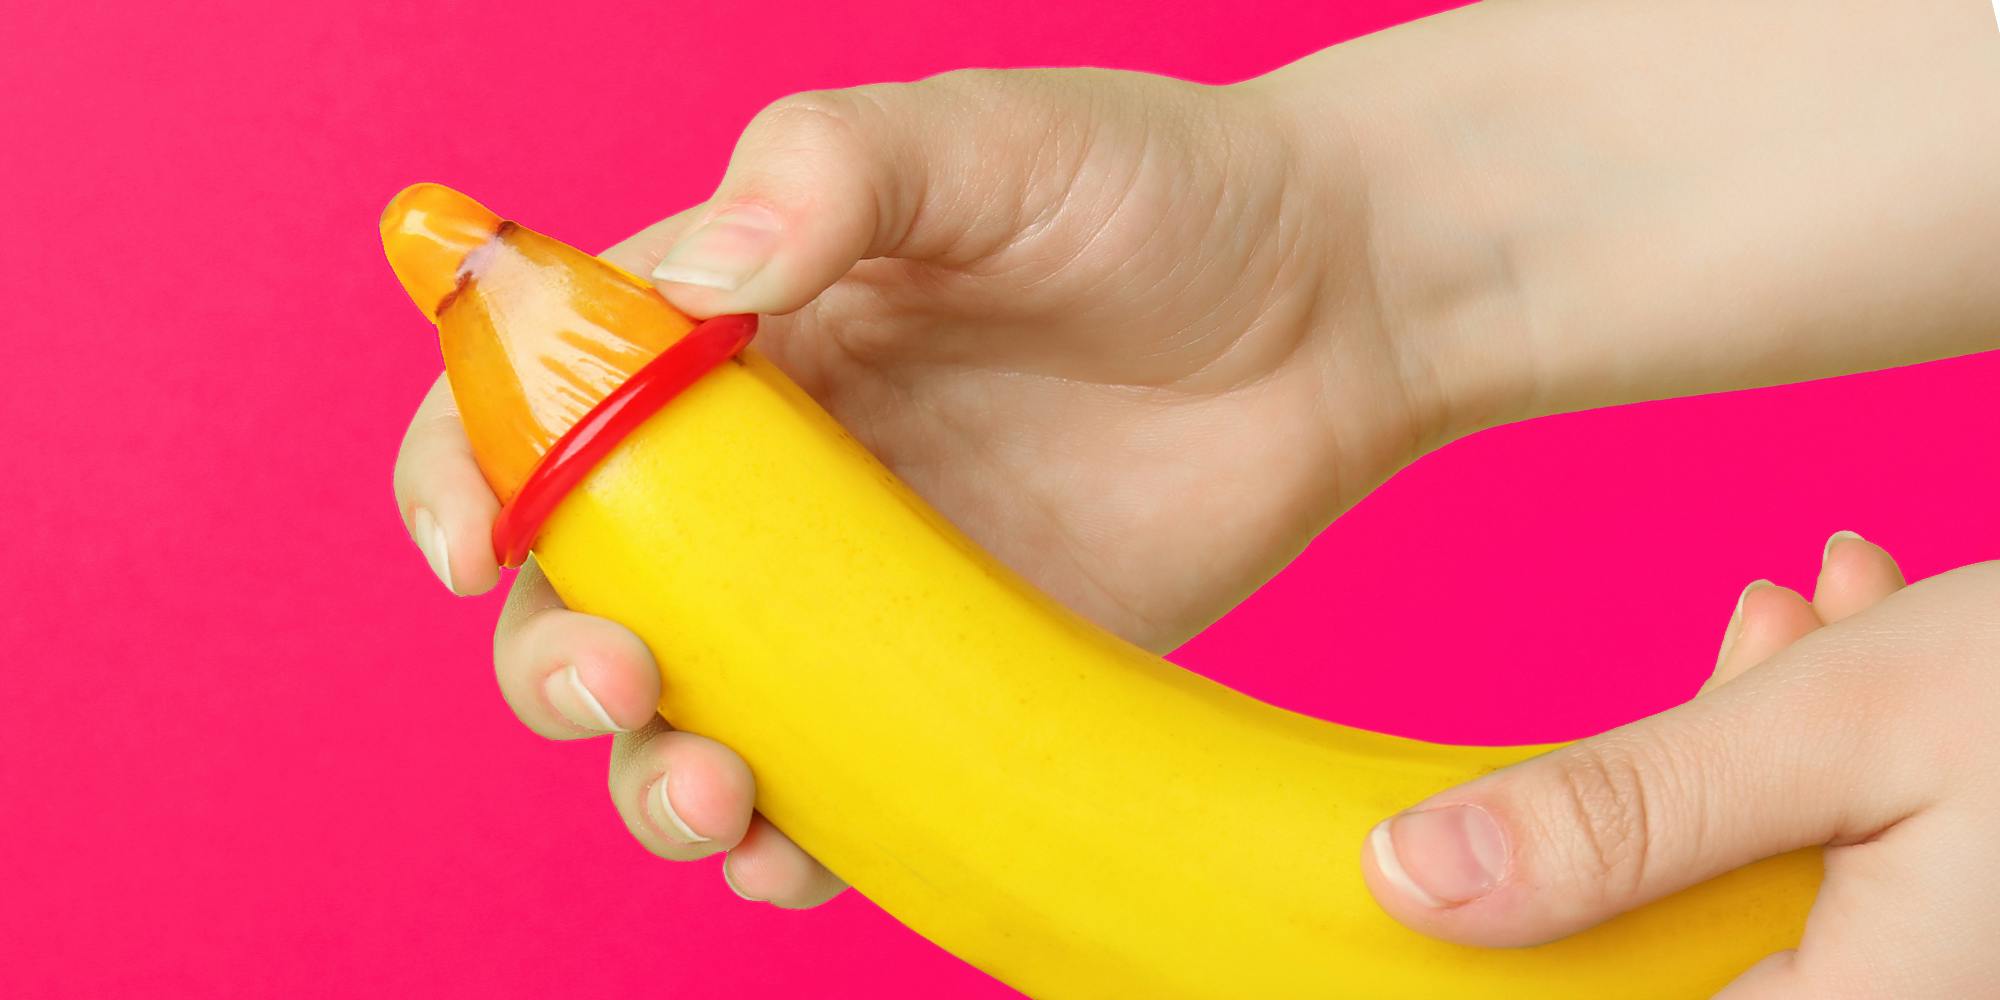 Woman putting condom on banana against color background